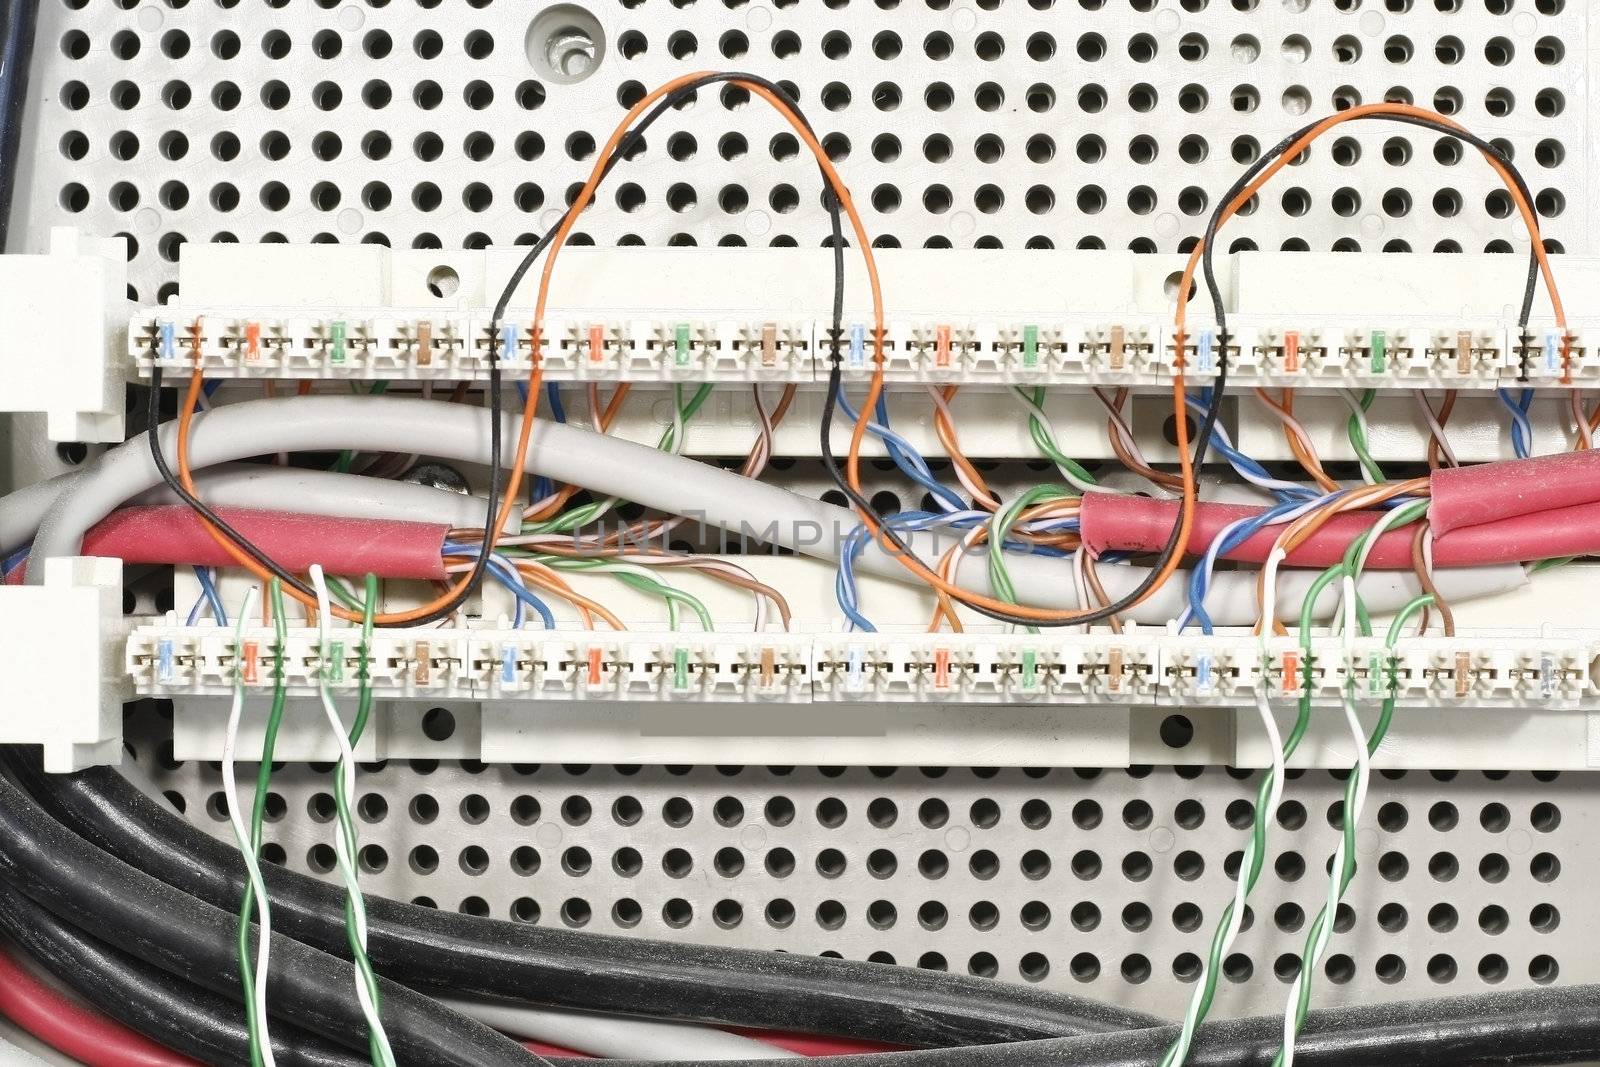 Junction Box of internet cables and LAN connections